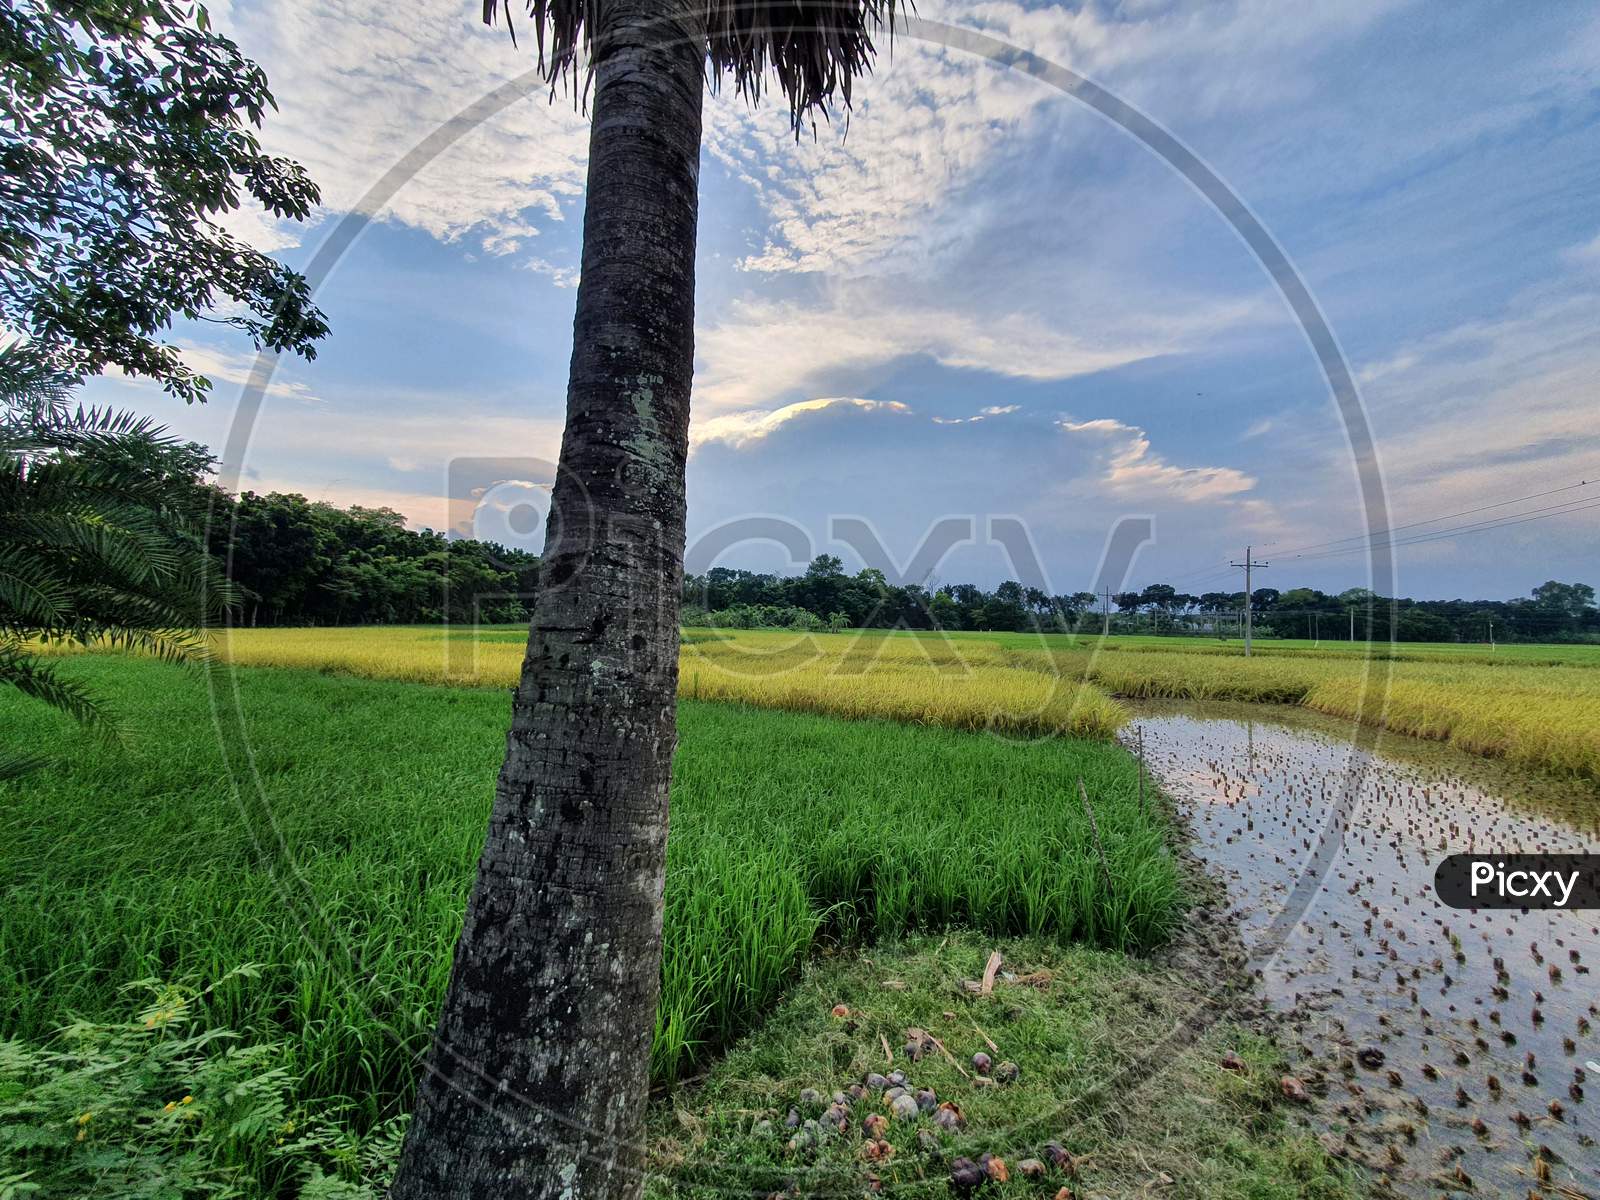 Rice fields, rural natural view of bangladesh. Colorful and natural landscape